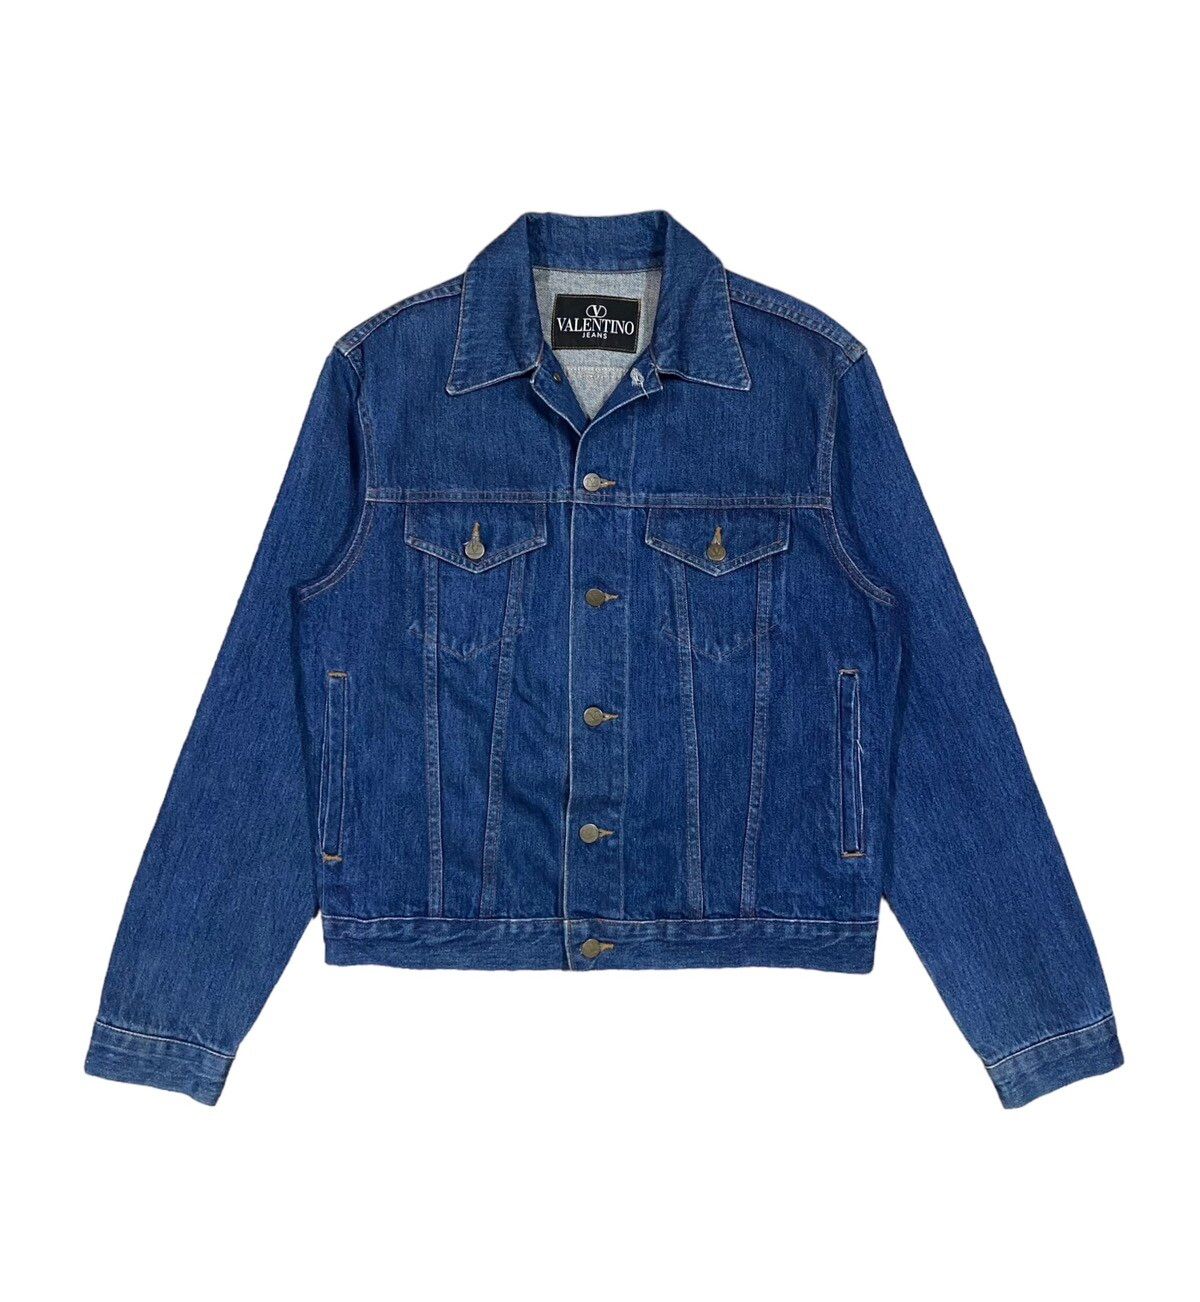 Valentino Jeans Made In Italy Type-3 Denim Jacket - 1